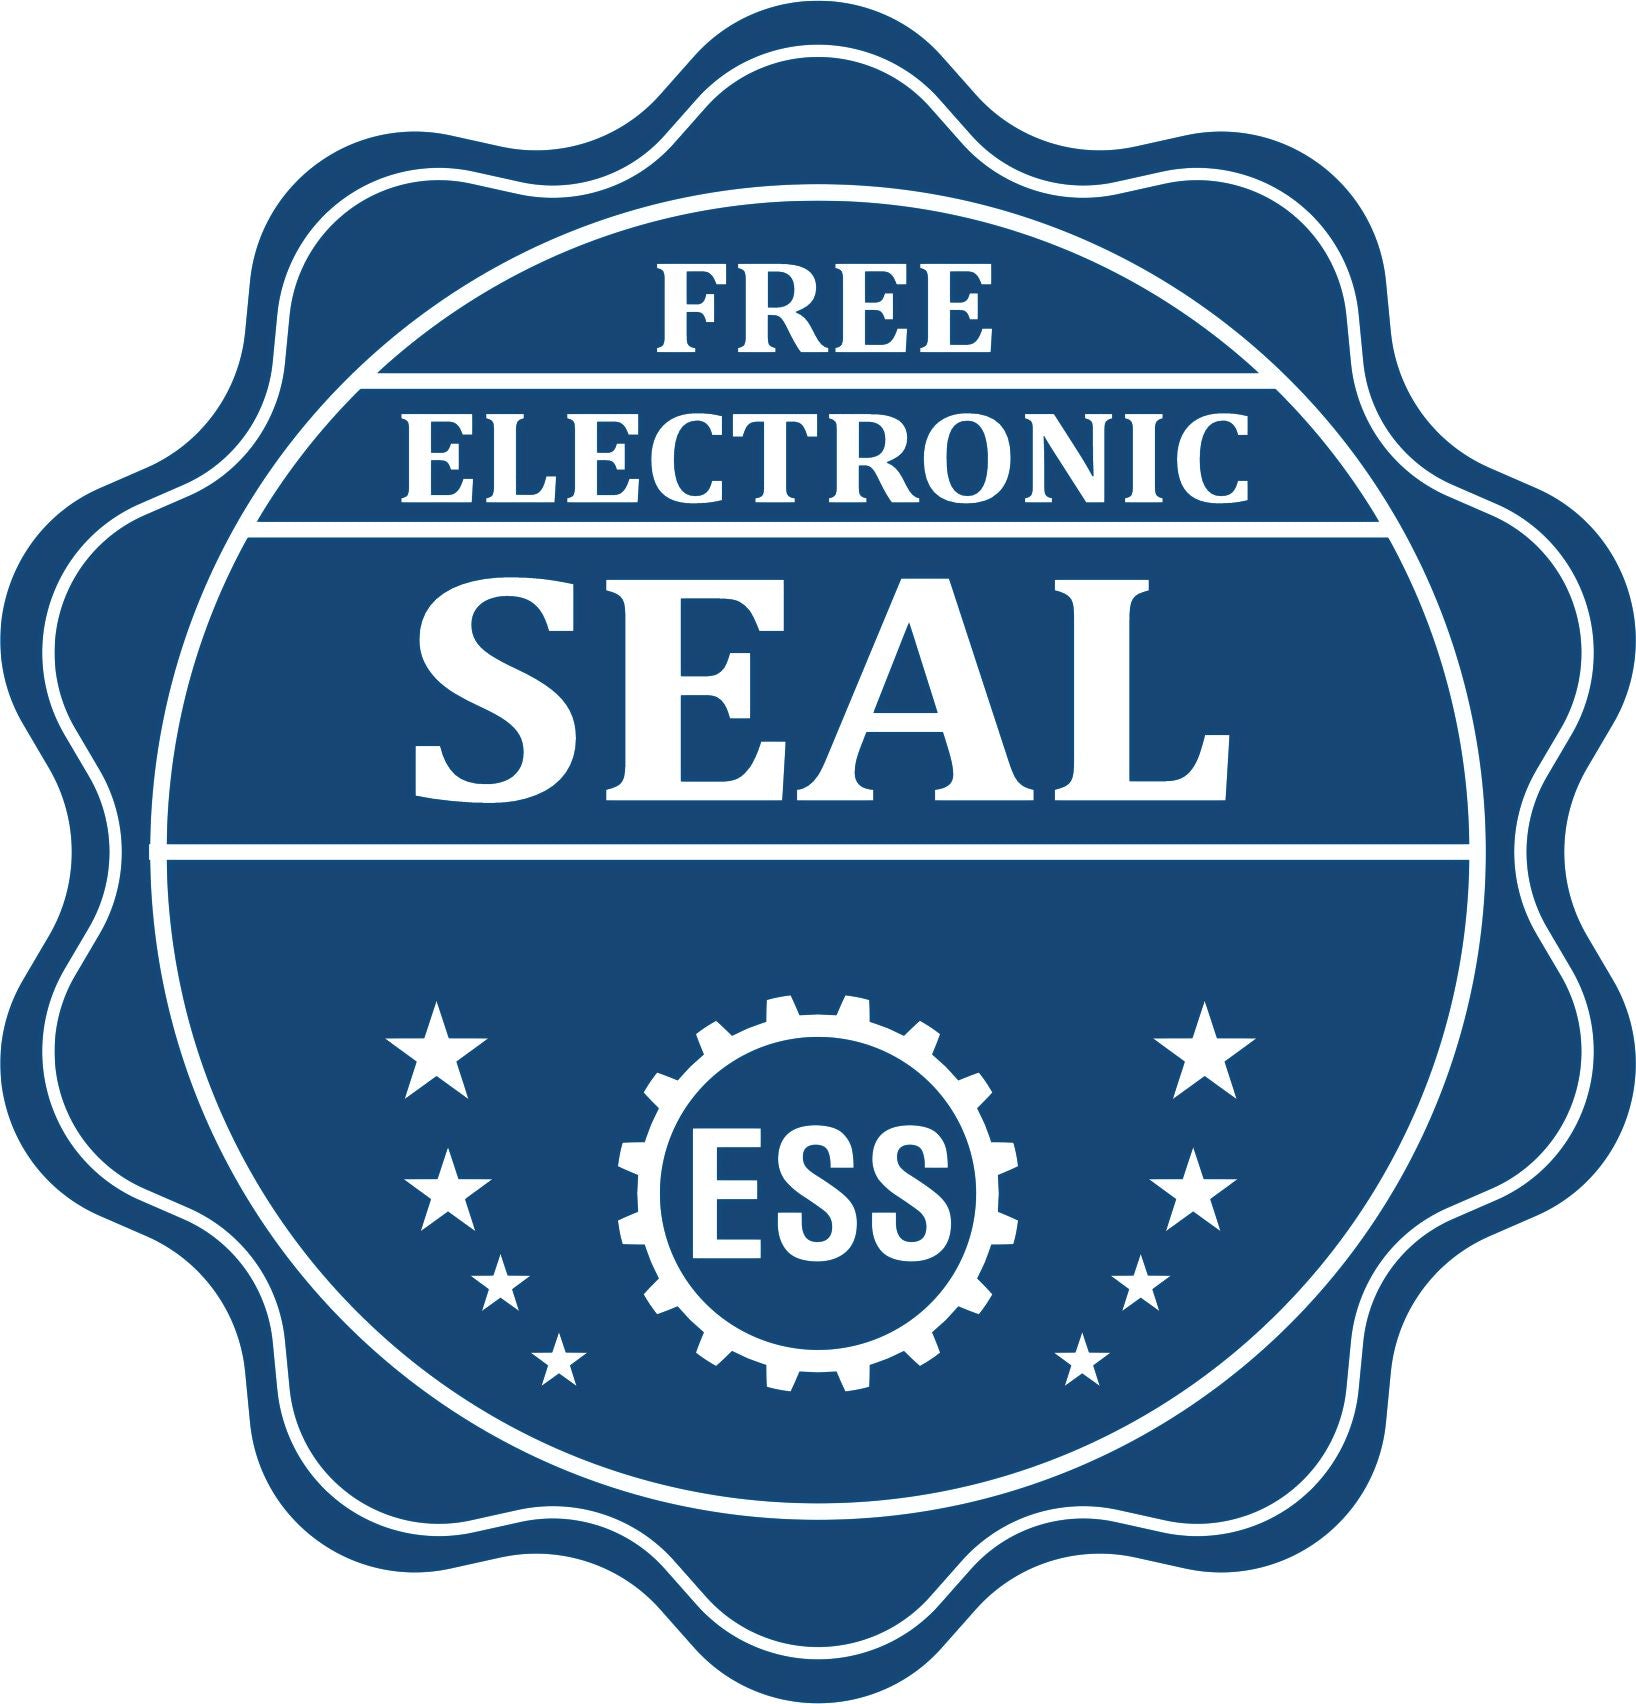 A badge showing a free electronic seal for the Premium MaxLight Pre-Inked South Dakota Geology Stamp with stars and the ESS gear on the emblem.